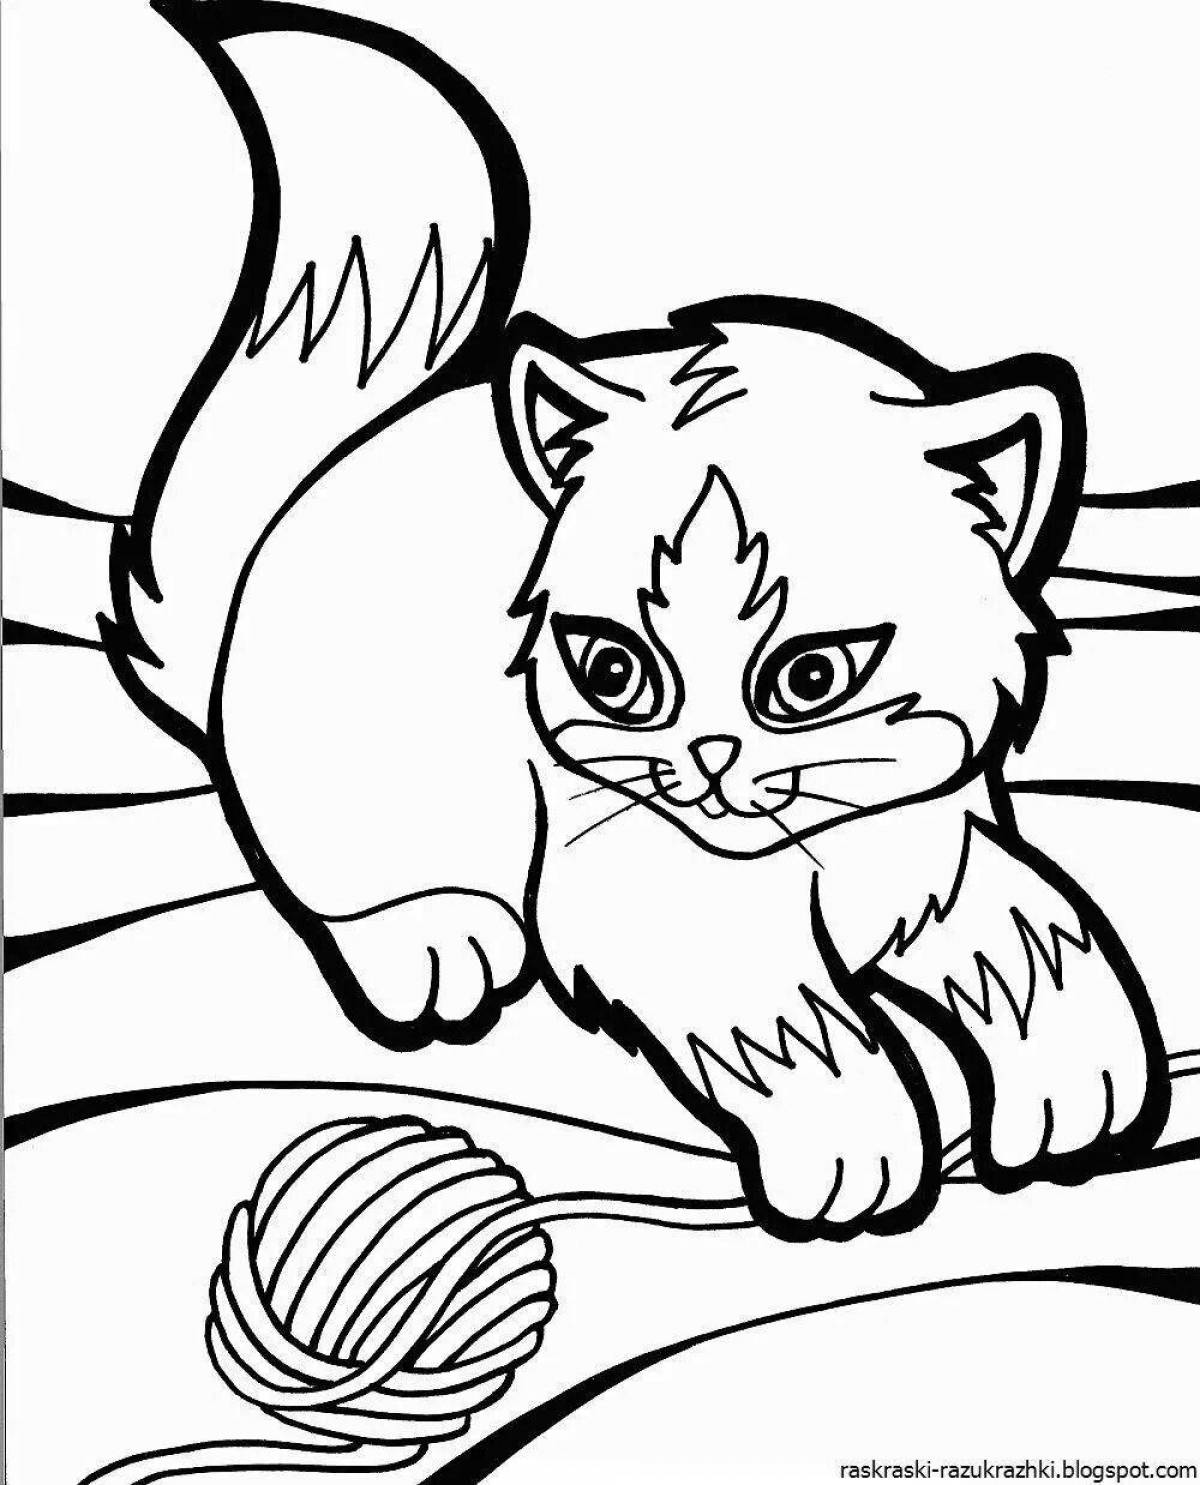 A fascinating coloring book for girls 7 years old with cats